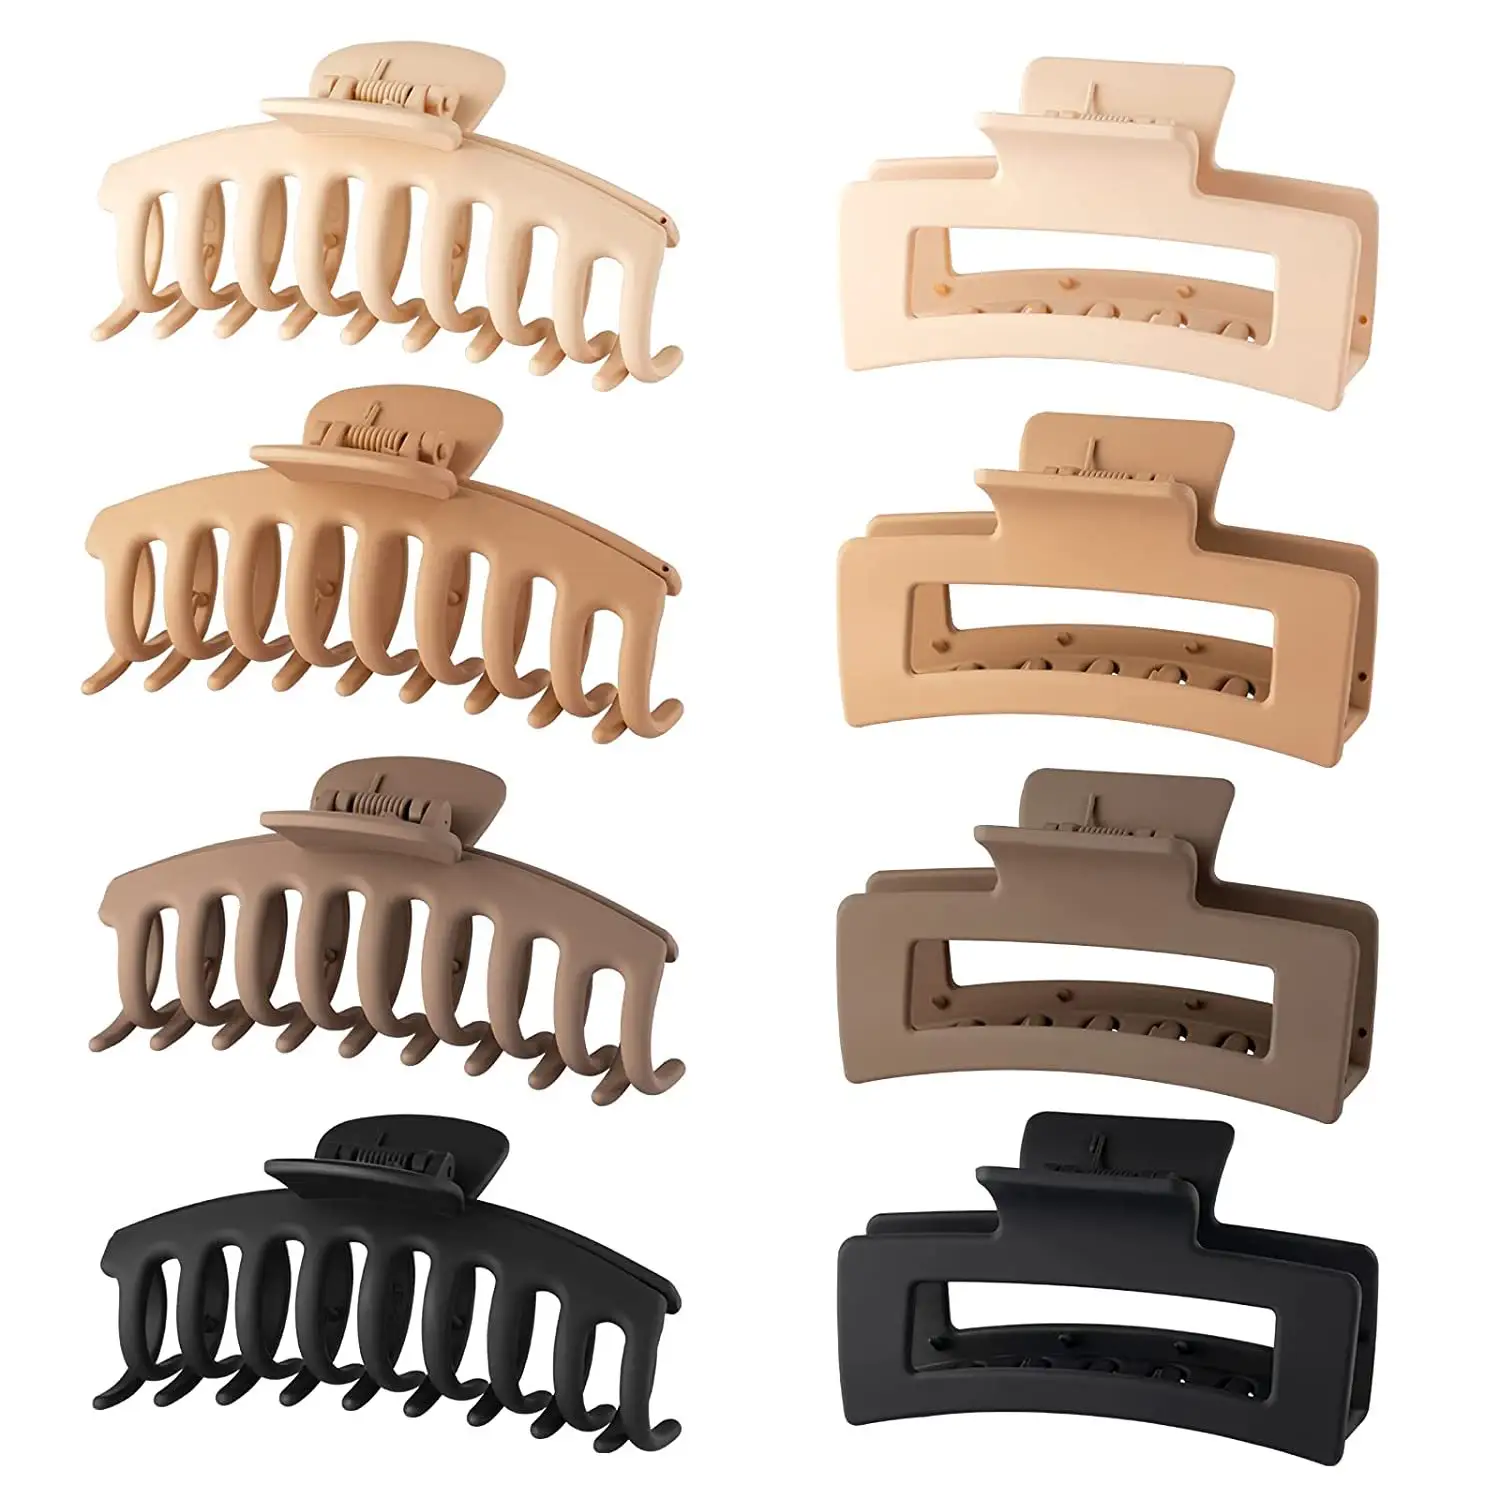 HC123C Big Non-slip Hairgrips 8pcs amazon Large Matte Banana Rectangle Neutral Hair claw Clips Set for thick thin hair